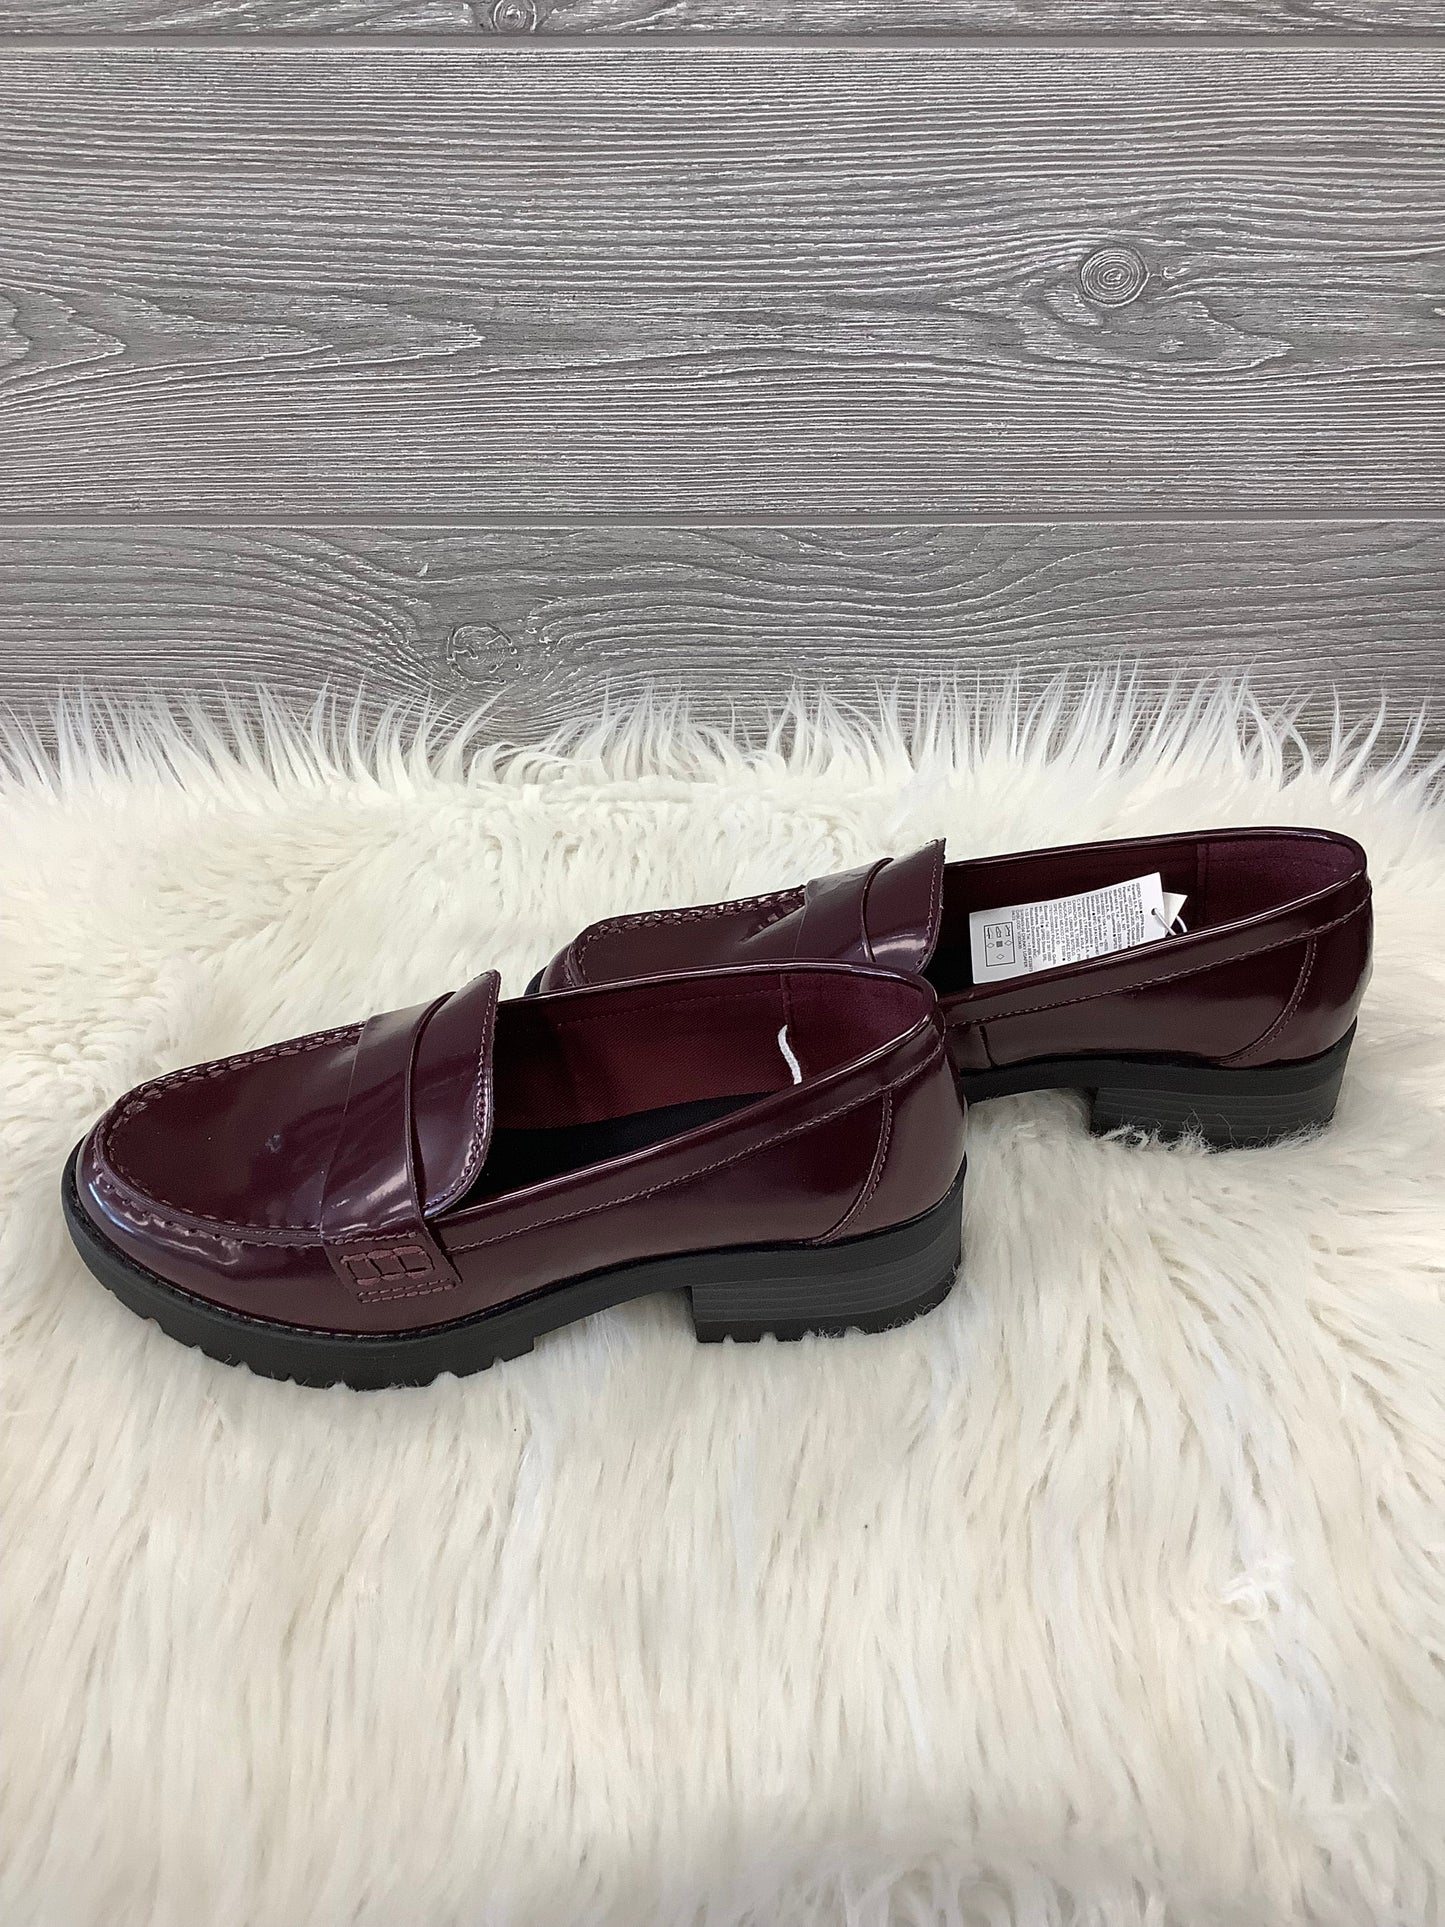 Shoes Heels Loafer Oxford By Old Navy  Size: 8